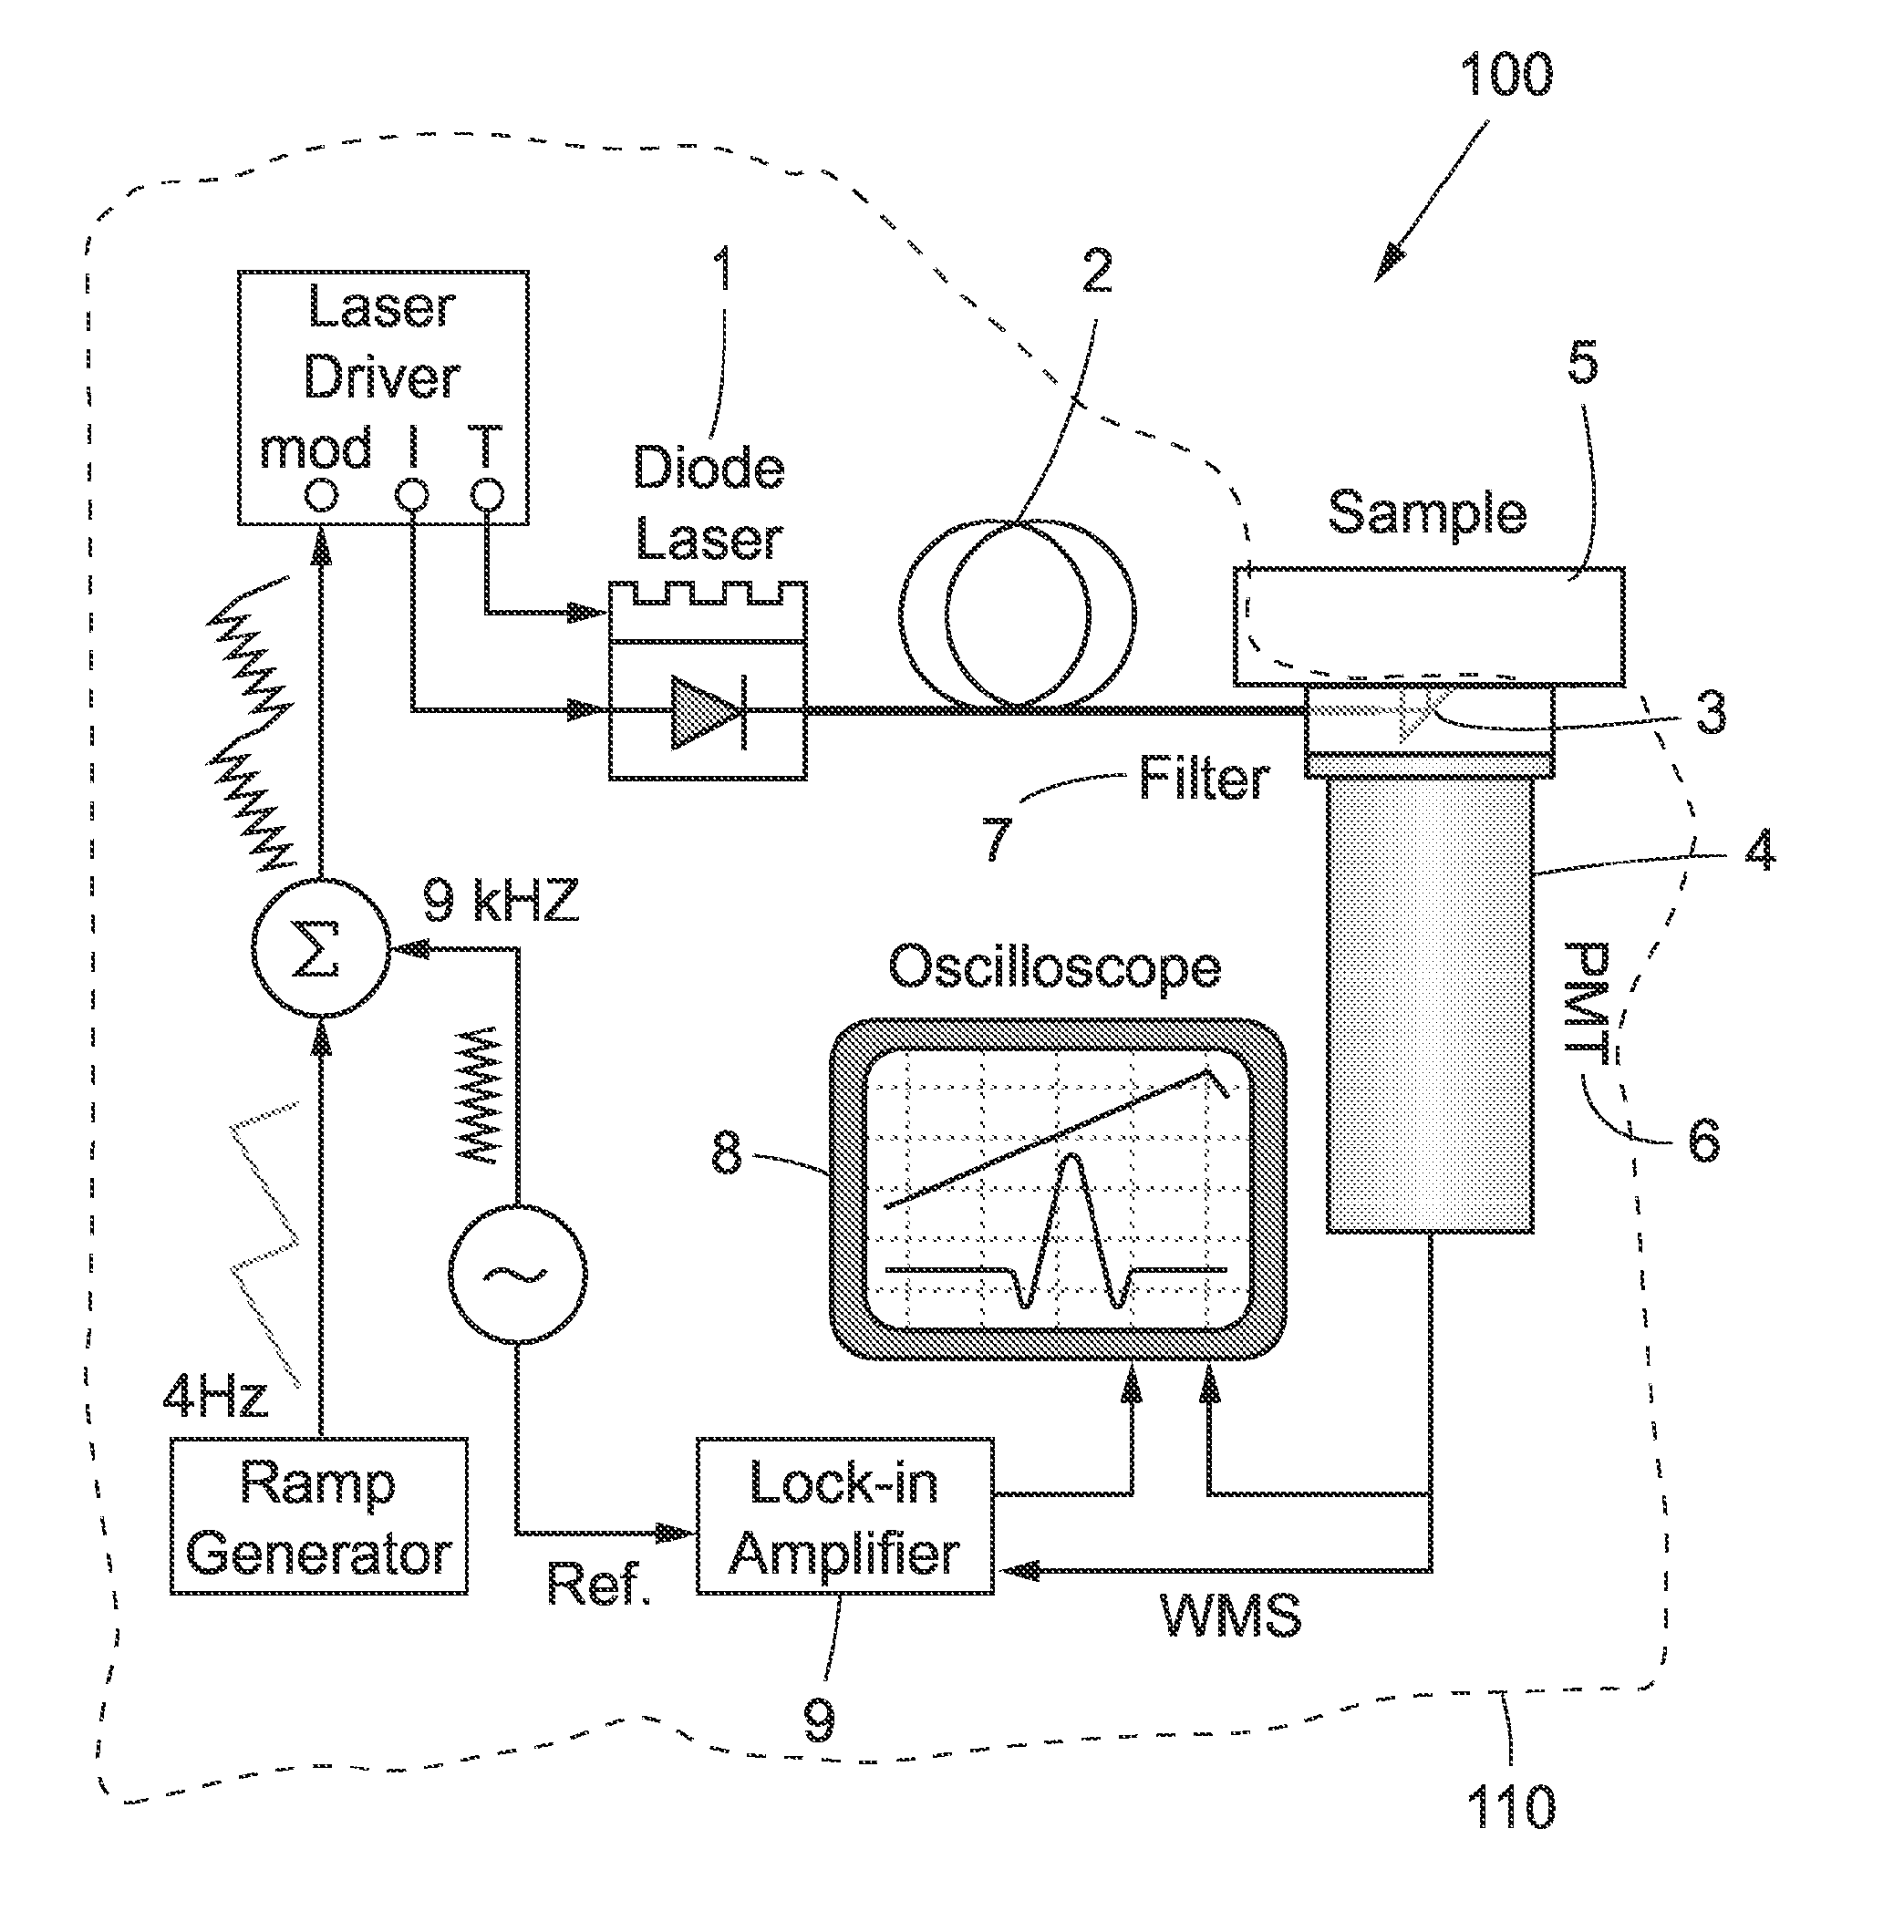 Human cavity gas measurement device and method